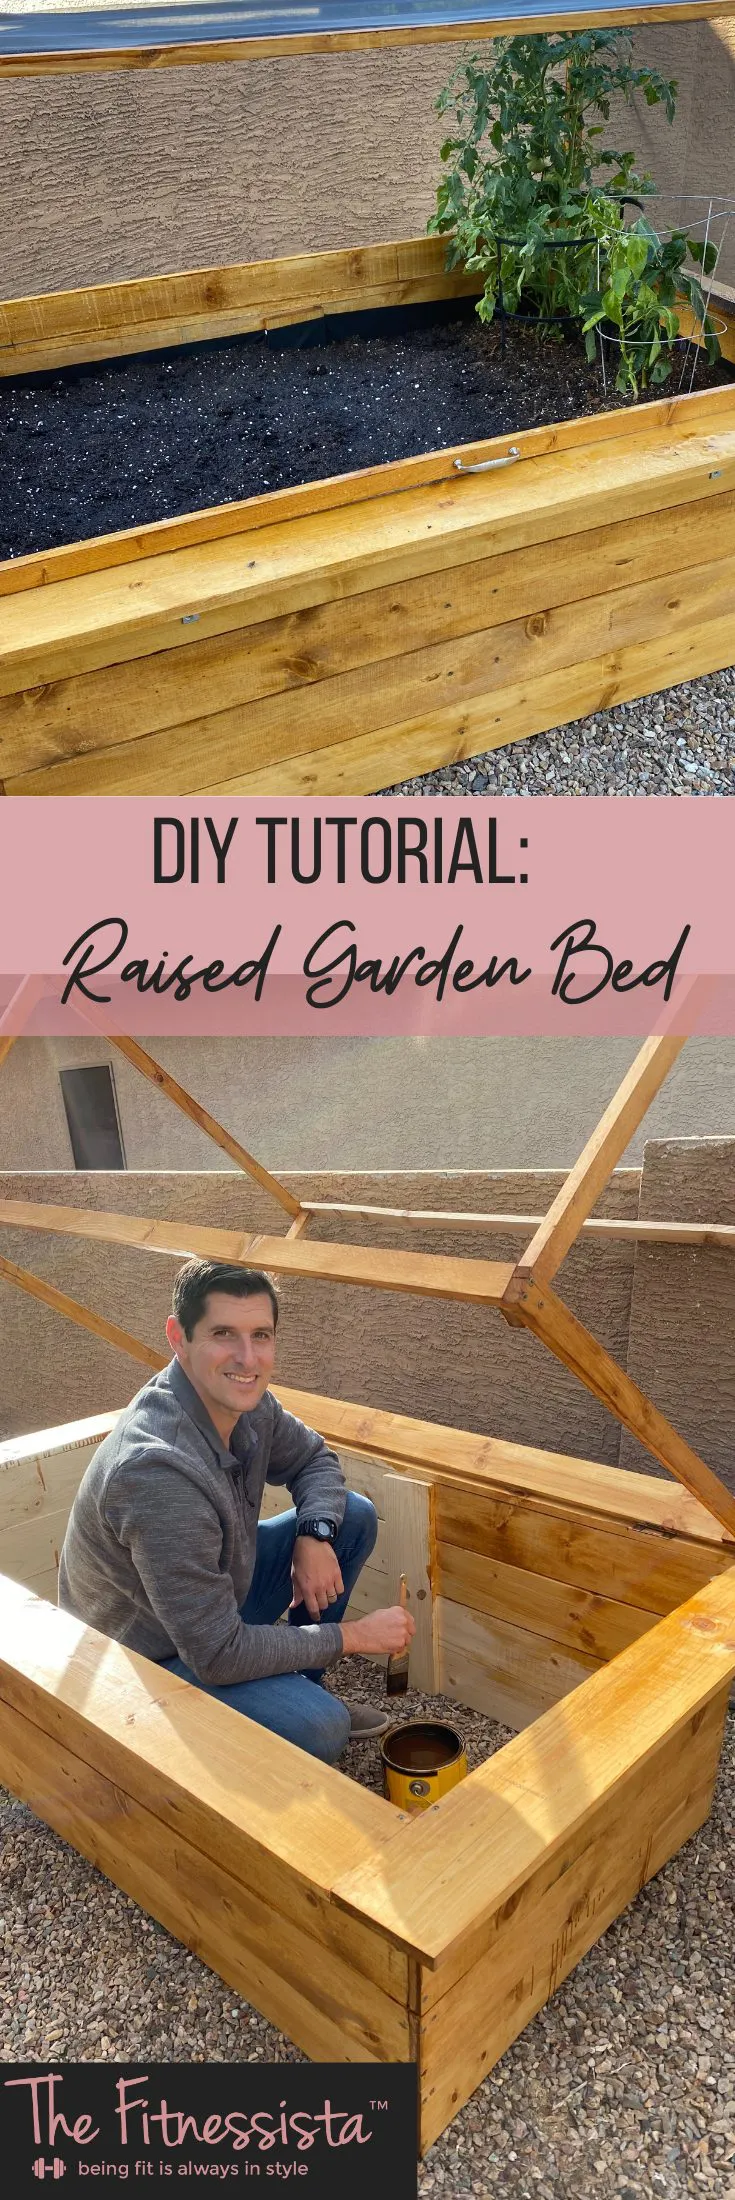 DIY raised garden bed! Grow your own veggies and herbs at home. fitnessista.com